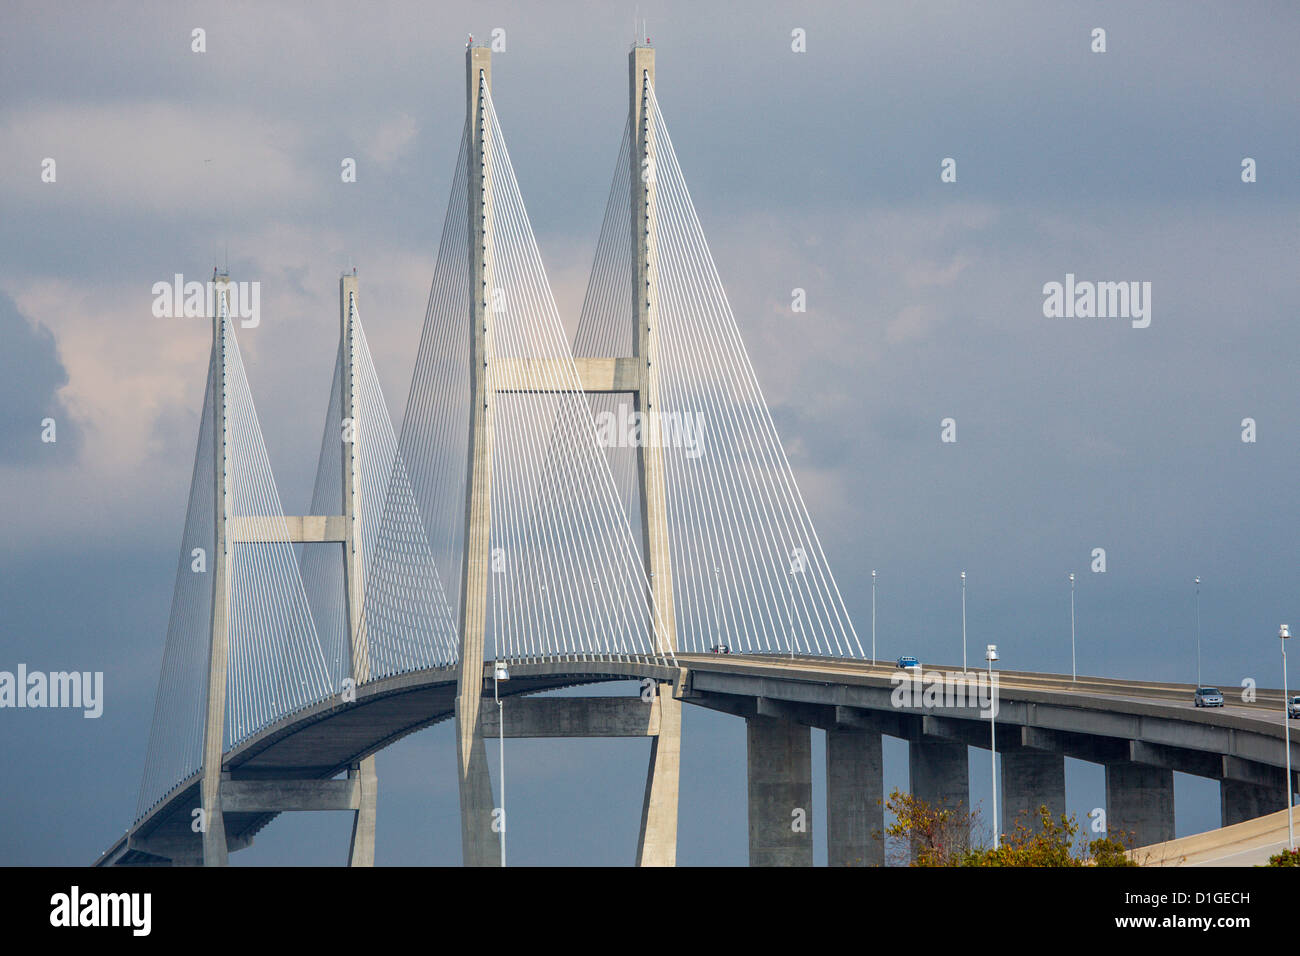 Sidney Lanier Bridge is a cable-stayed bridge carrying Route 17 over the Brunswick River in Brunswick, Georgia, Stock Photo